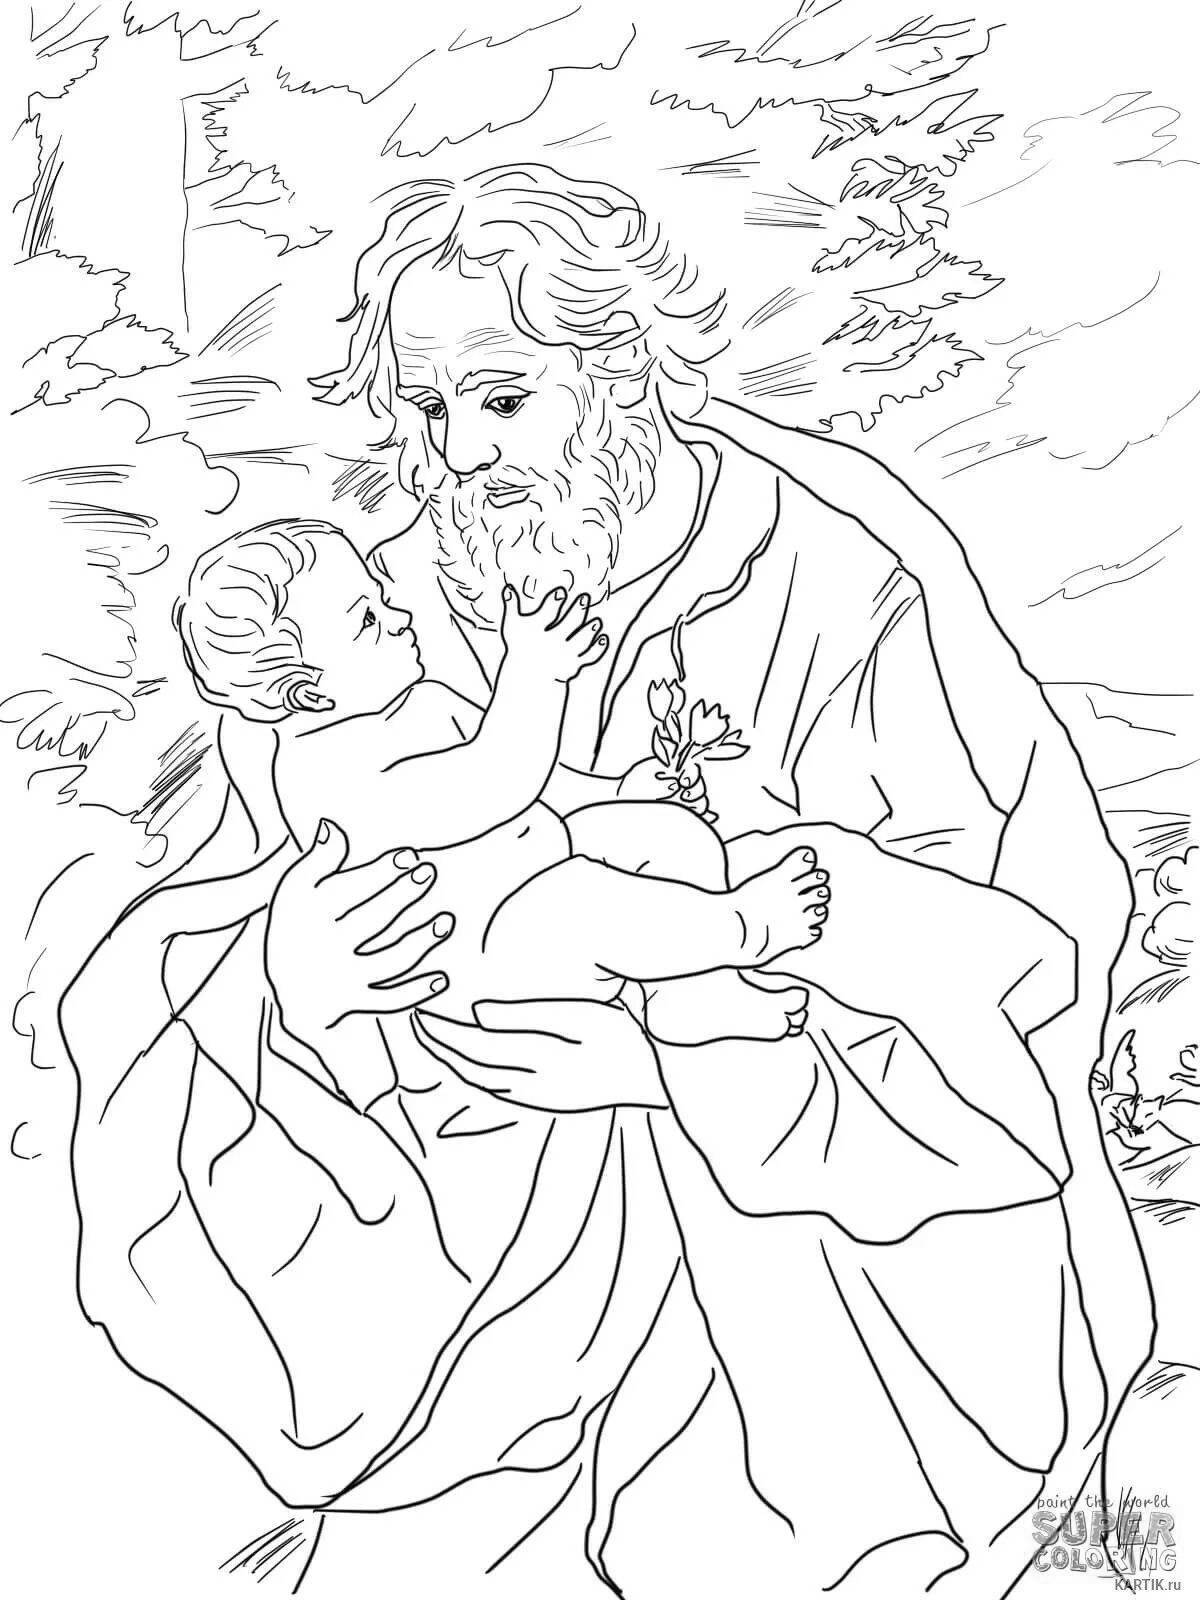 Coloring page of the festive meeting of the Lord